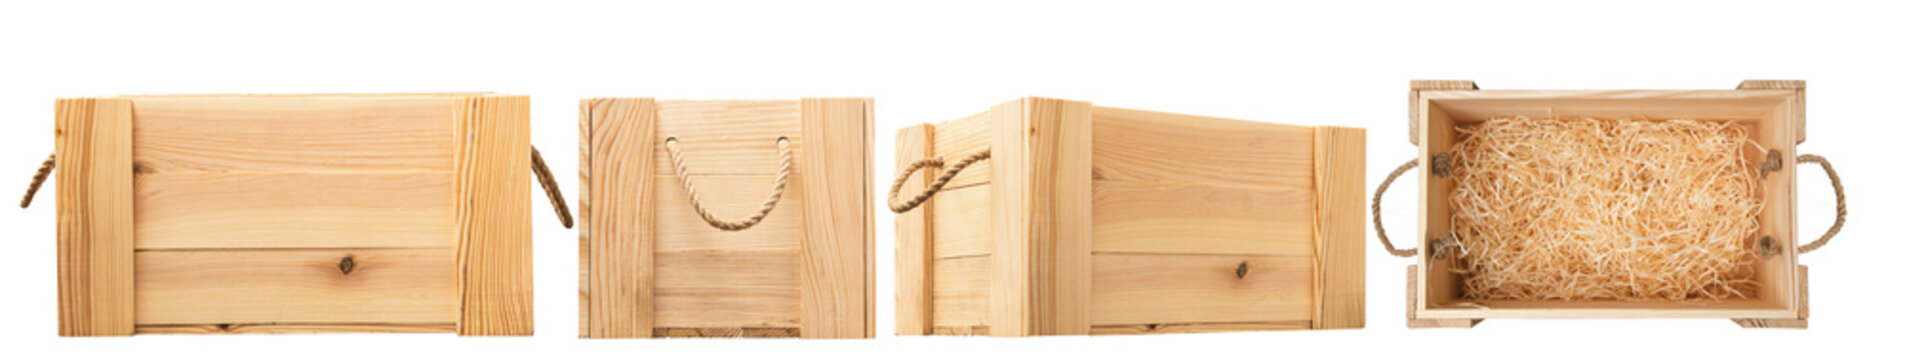 wooden box with rope handles isolated on white background. Empty wooden box with rope handles isolated on white background. background . Close-up, Set of empty wooden crates on white background